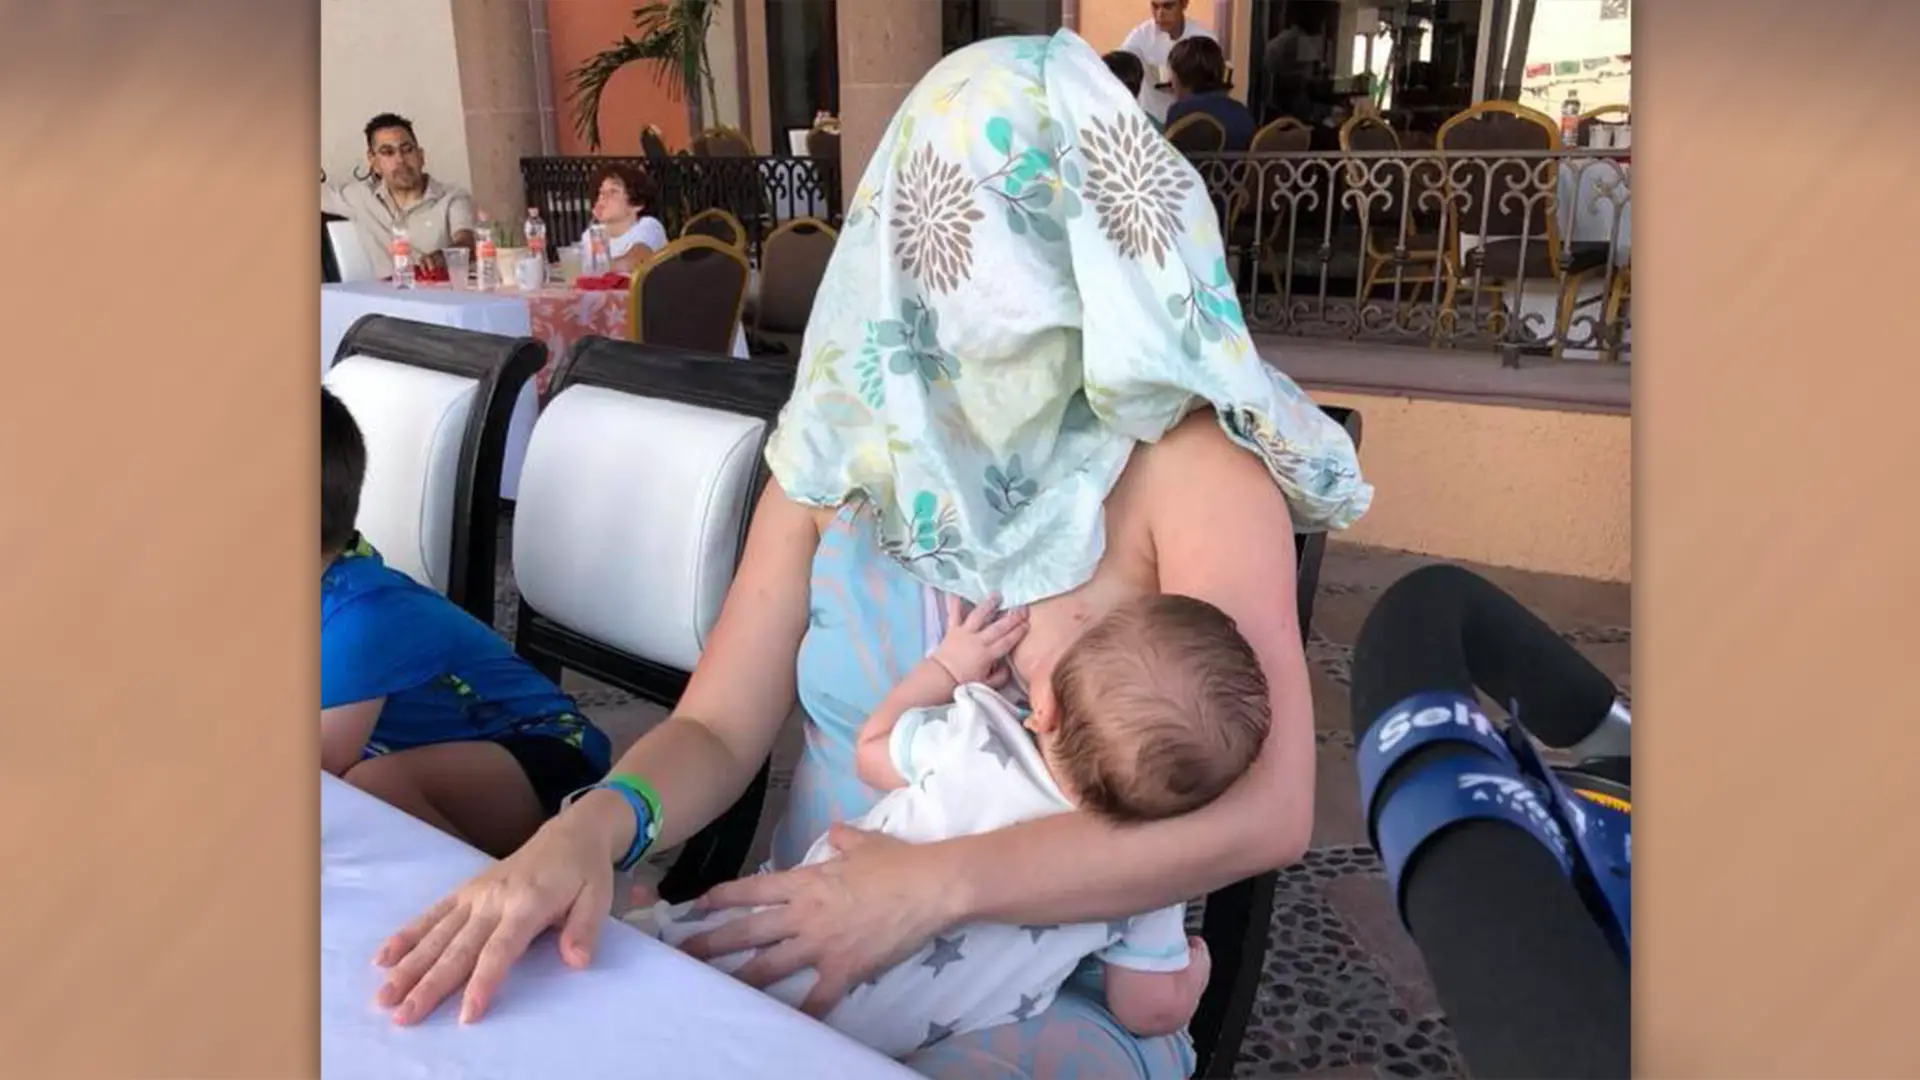 This Breastfeeding Mom Had The Best Response When She Was Asked To Cover Up